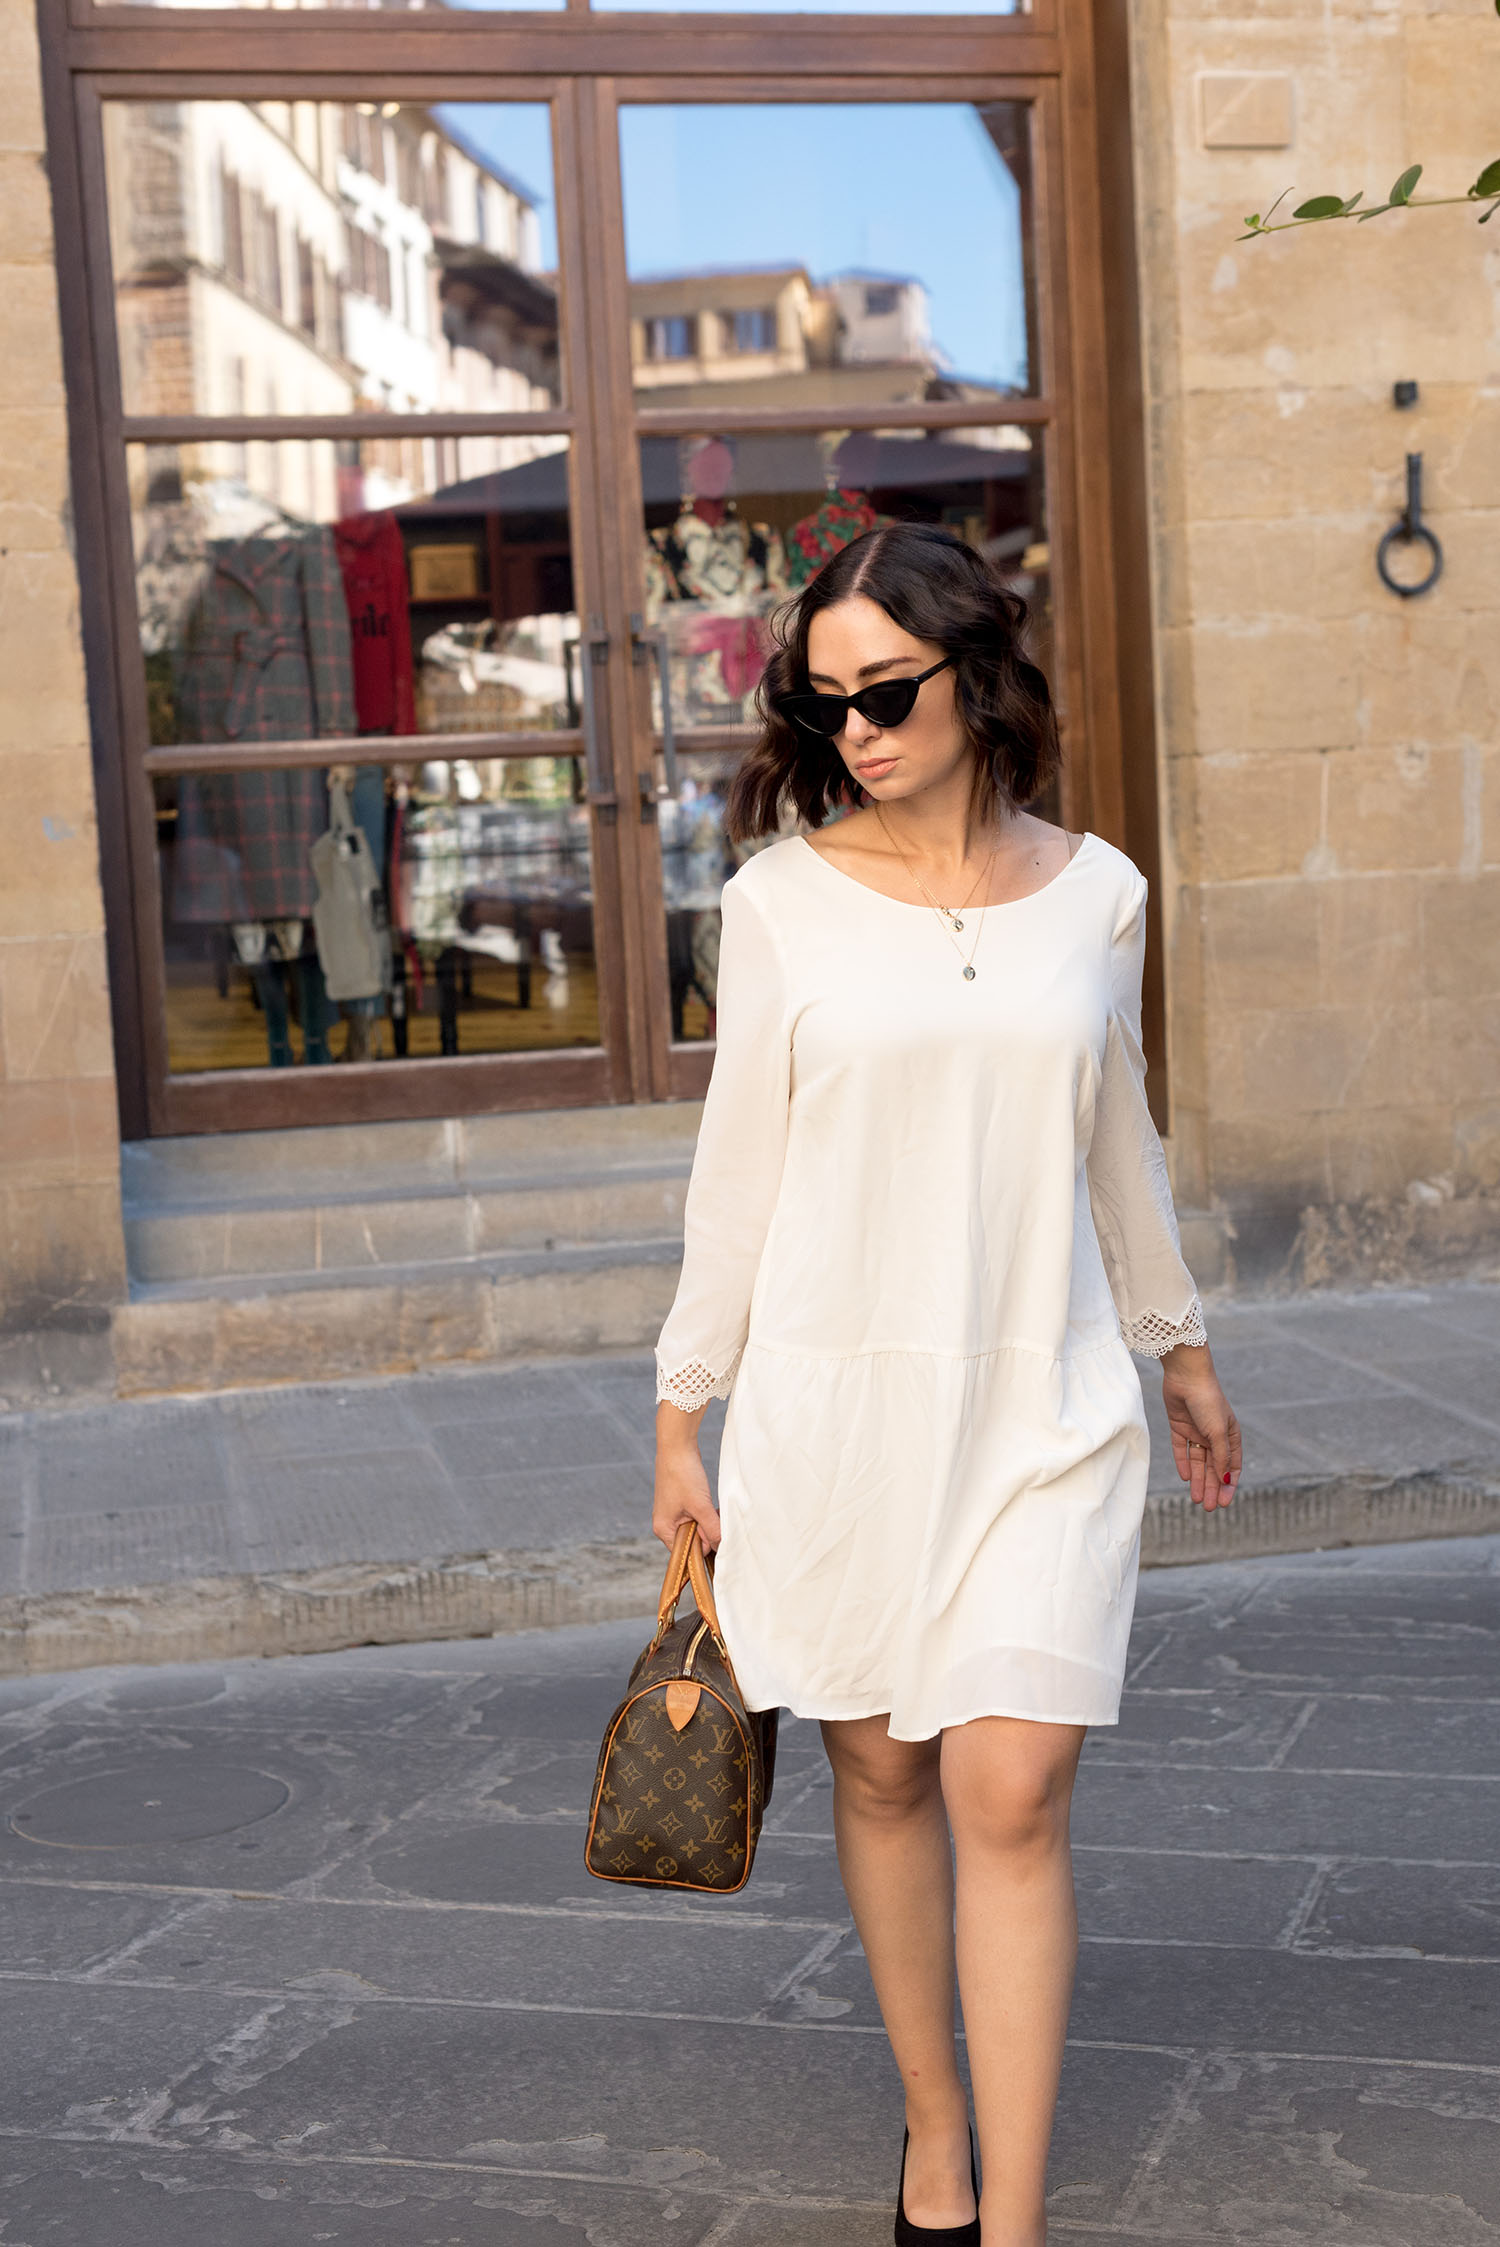 Top Canadian fashion blogger Cee Fardoe of Coco & Vera walks outside Gucci Garden in Florence, Italy, wearing a Sezane white silk dress and carrying a Louis Vuitton handbag